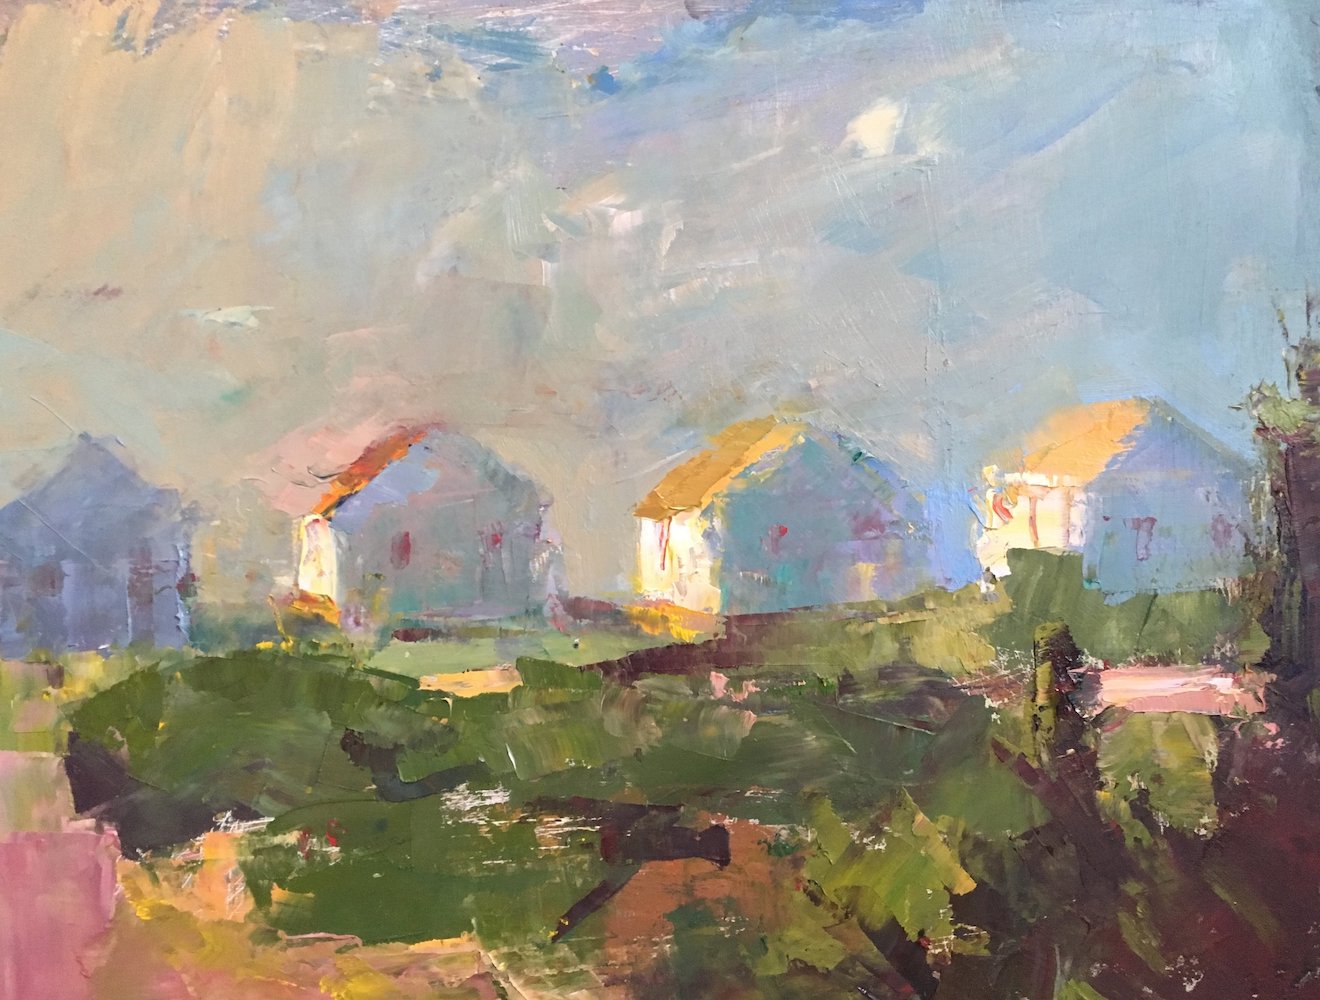 Sky Between, Plein Air Oil Painting by Mary Giammarino